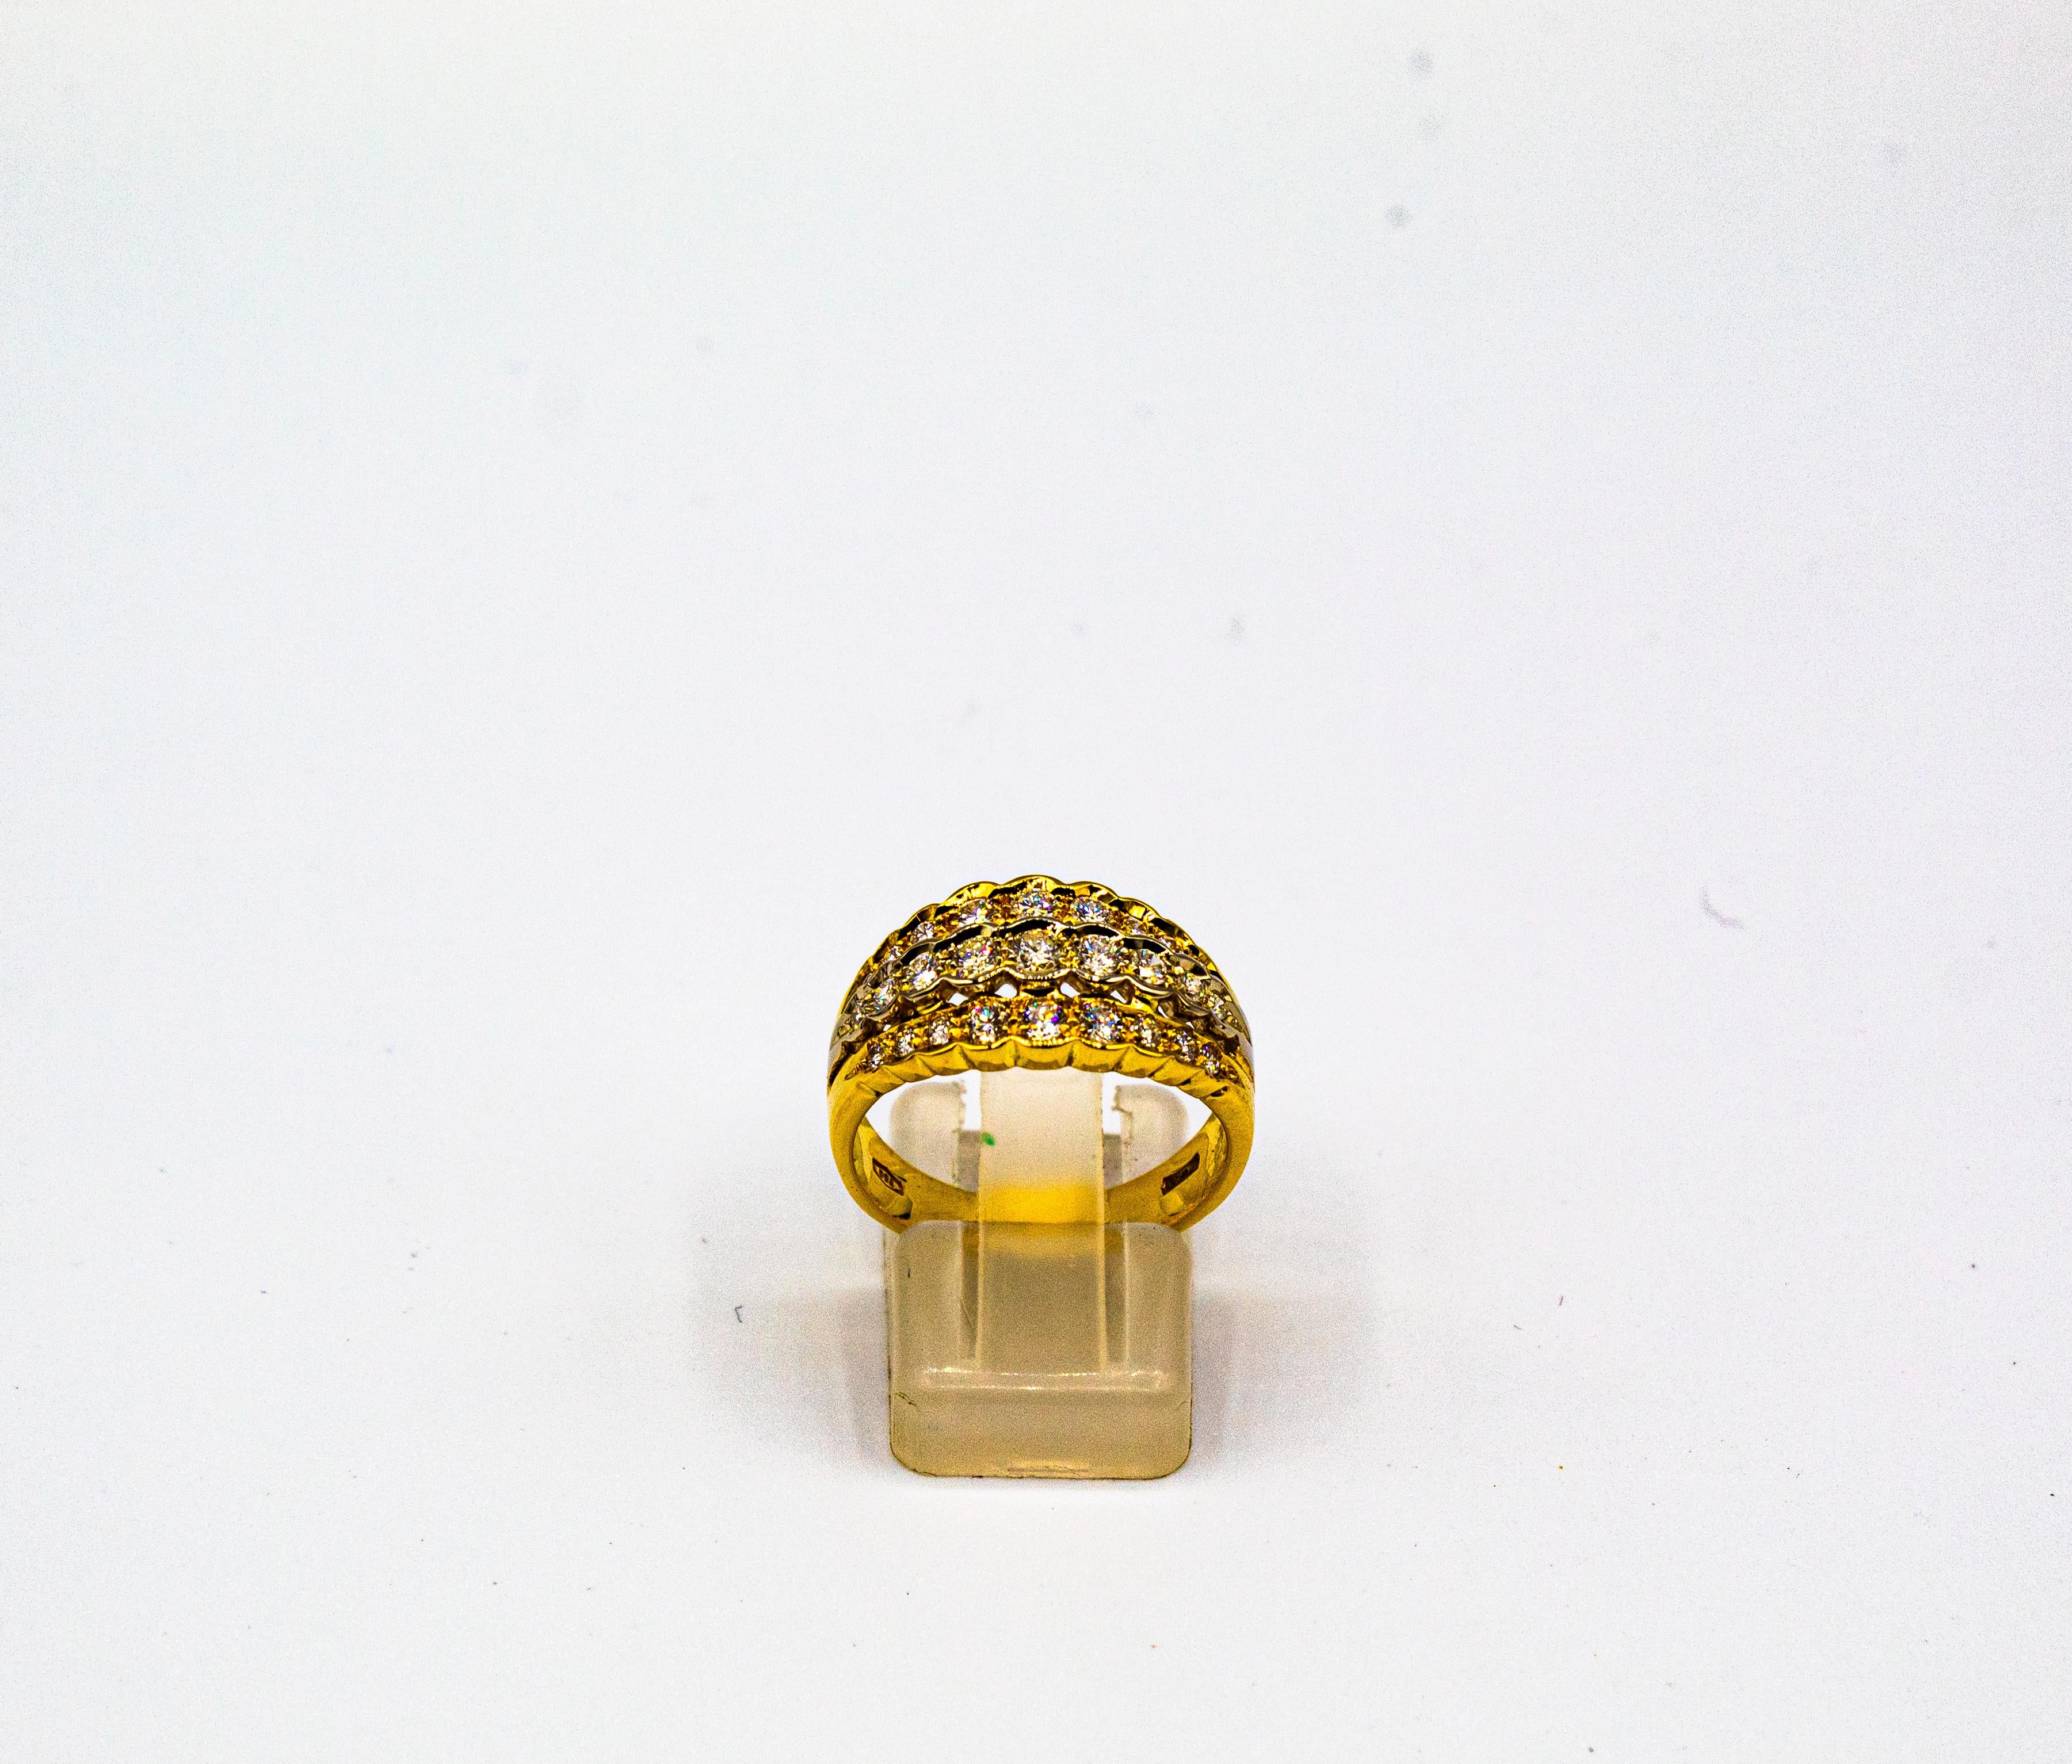 This Ring is made of 18K White and Yellow Gold.
This Ring has 0.80 Carats of White Brilliant Cut Diamonds.

Size ITA: 16 1/2 USA: 7 1/2

We're a workshop so every piece is handmade, customizable and resizable.